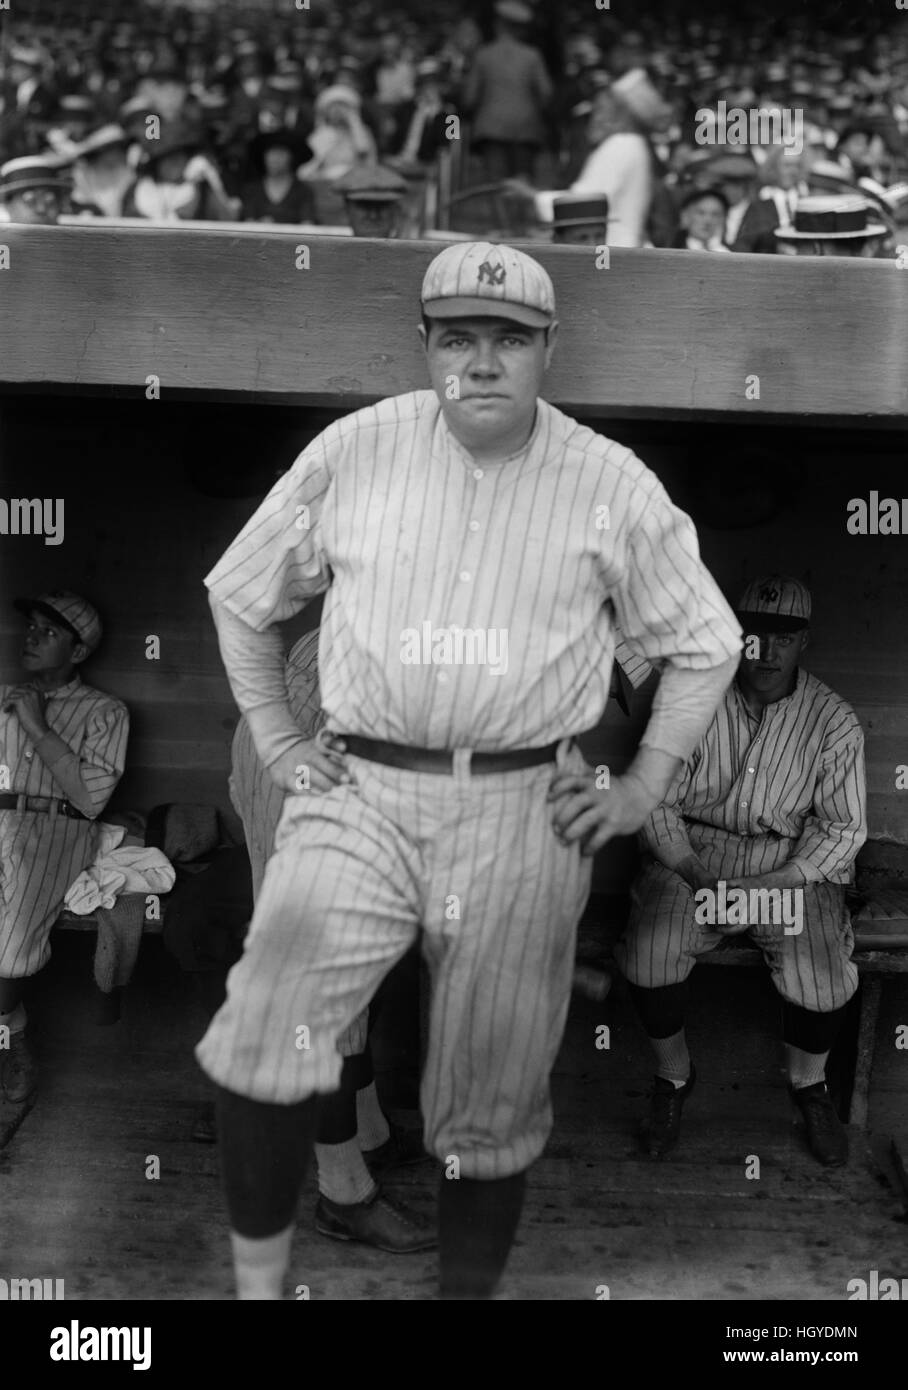 New York Yankees jersey worn by Babe Ruth (George Herman Ruth), National  Baseball Hall of Fame and Museum , Cooperstown, United States Stock Photo -  Alamy